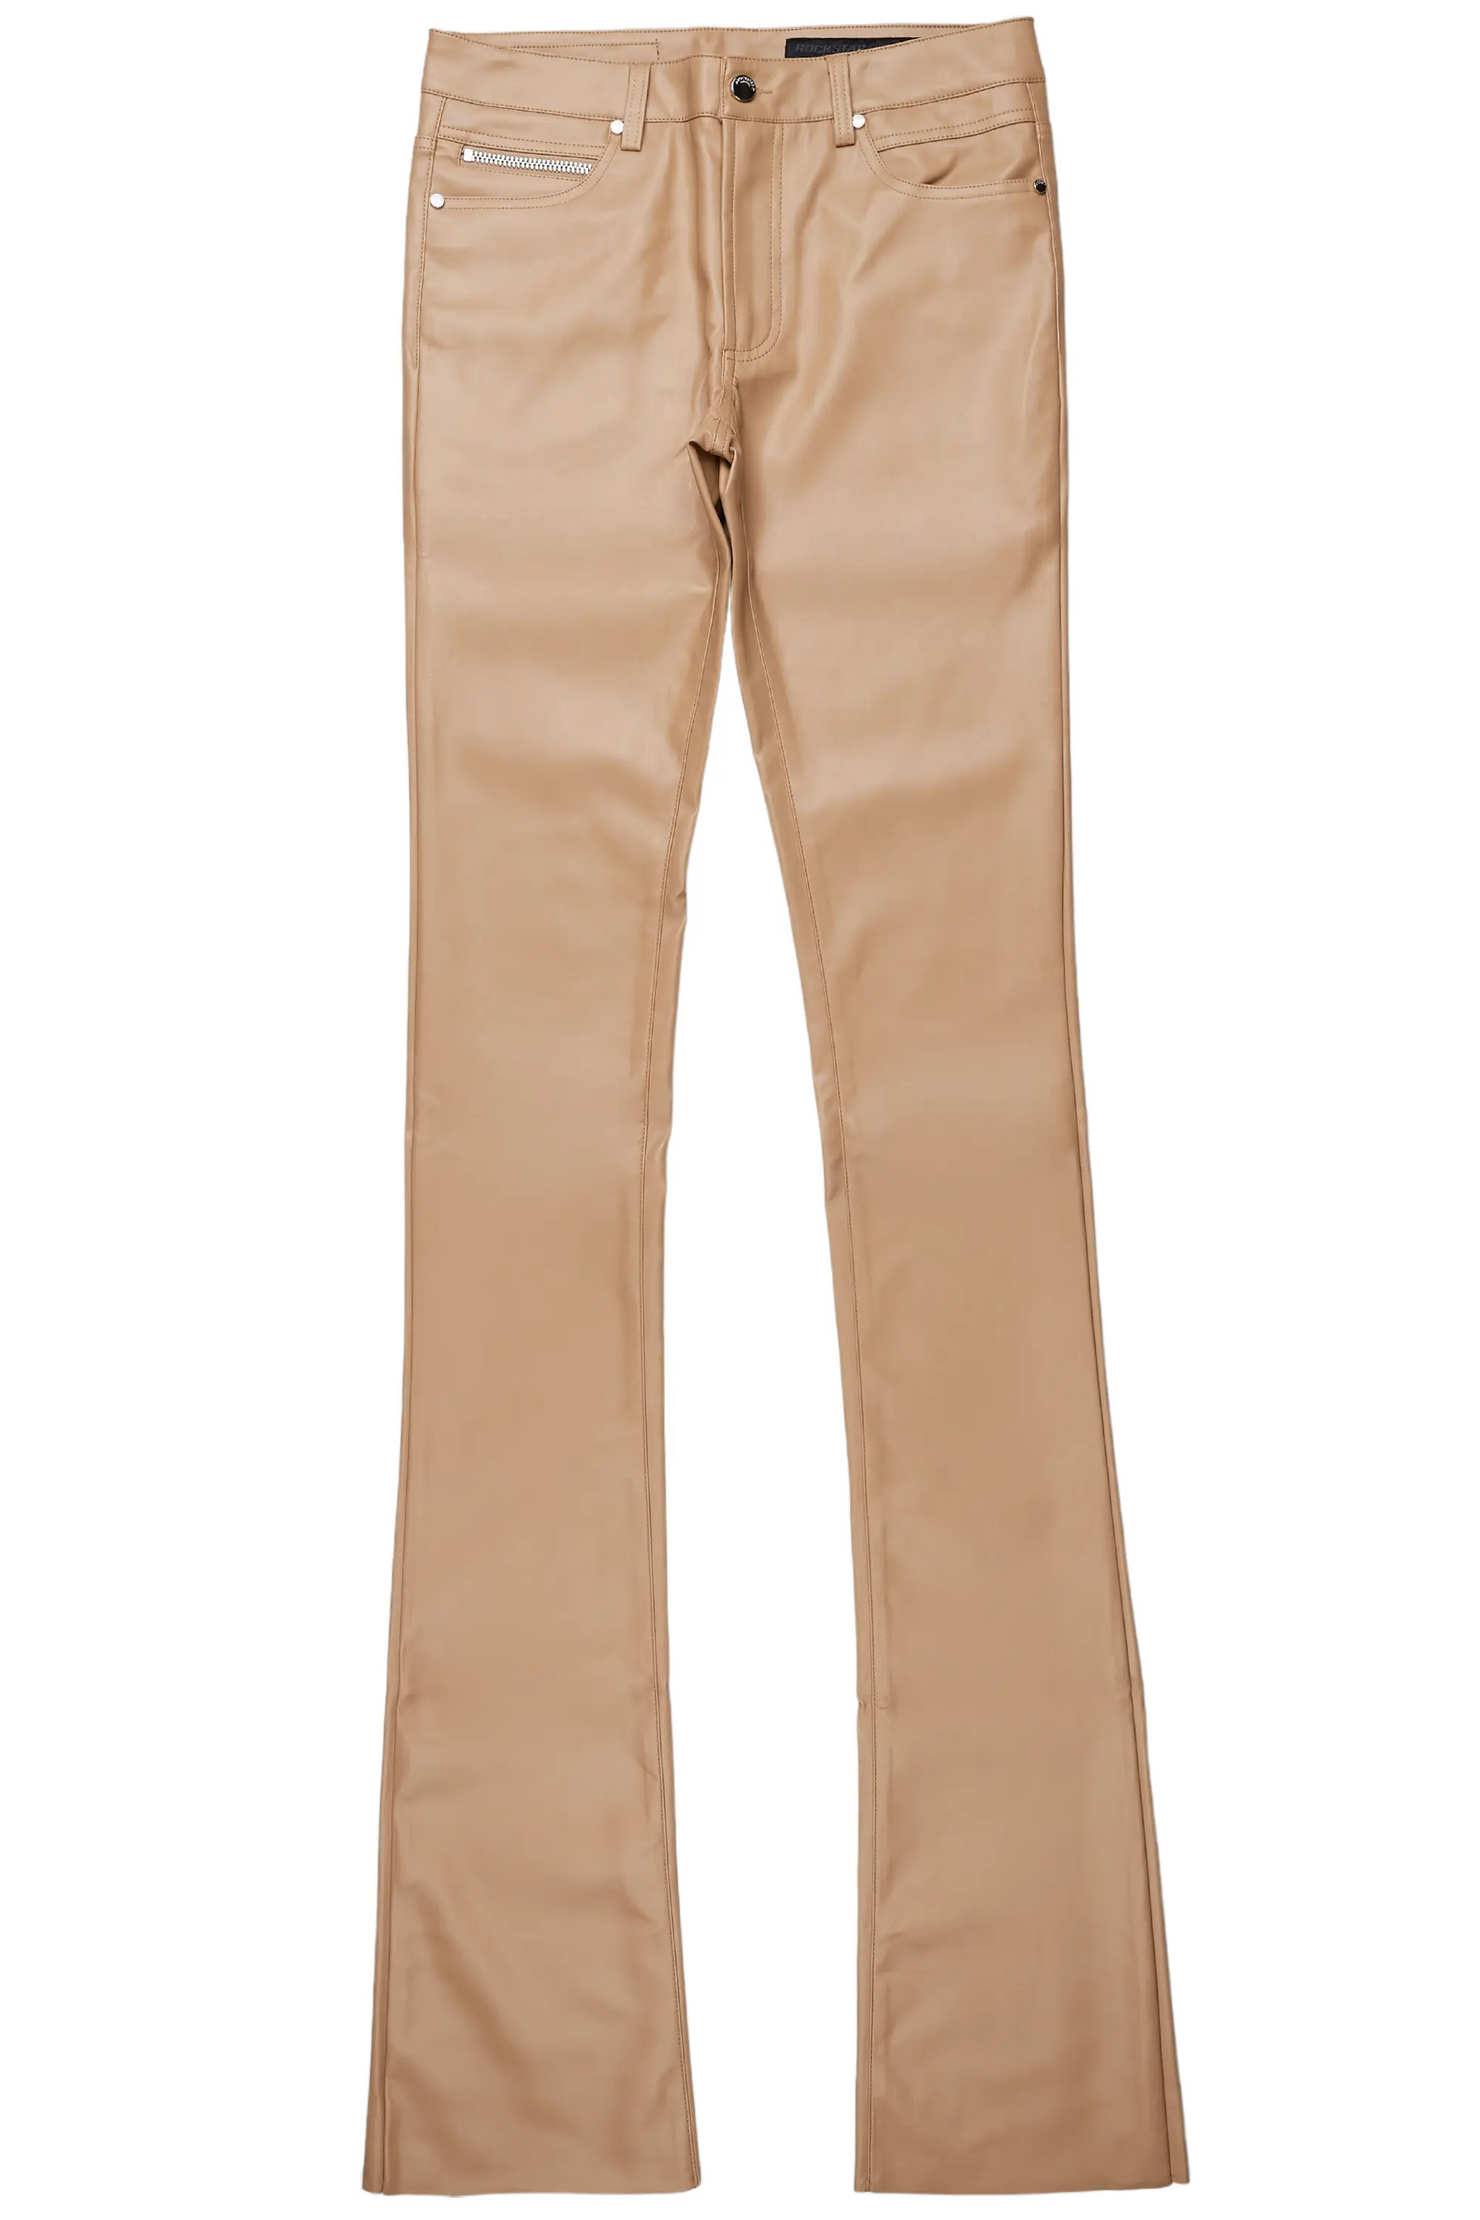 Ricky Tan Super Stacked Faux Leather Pant